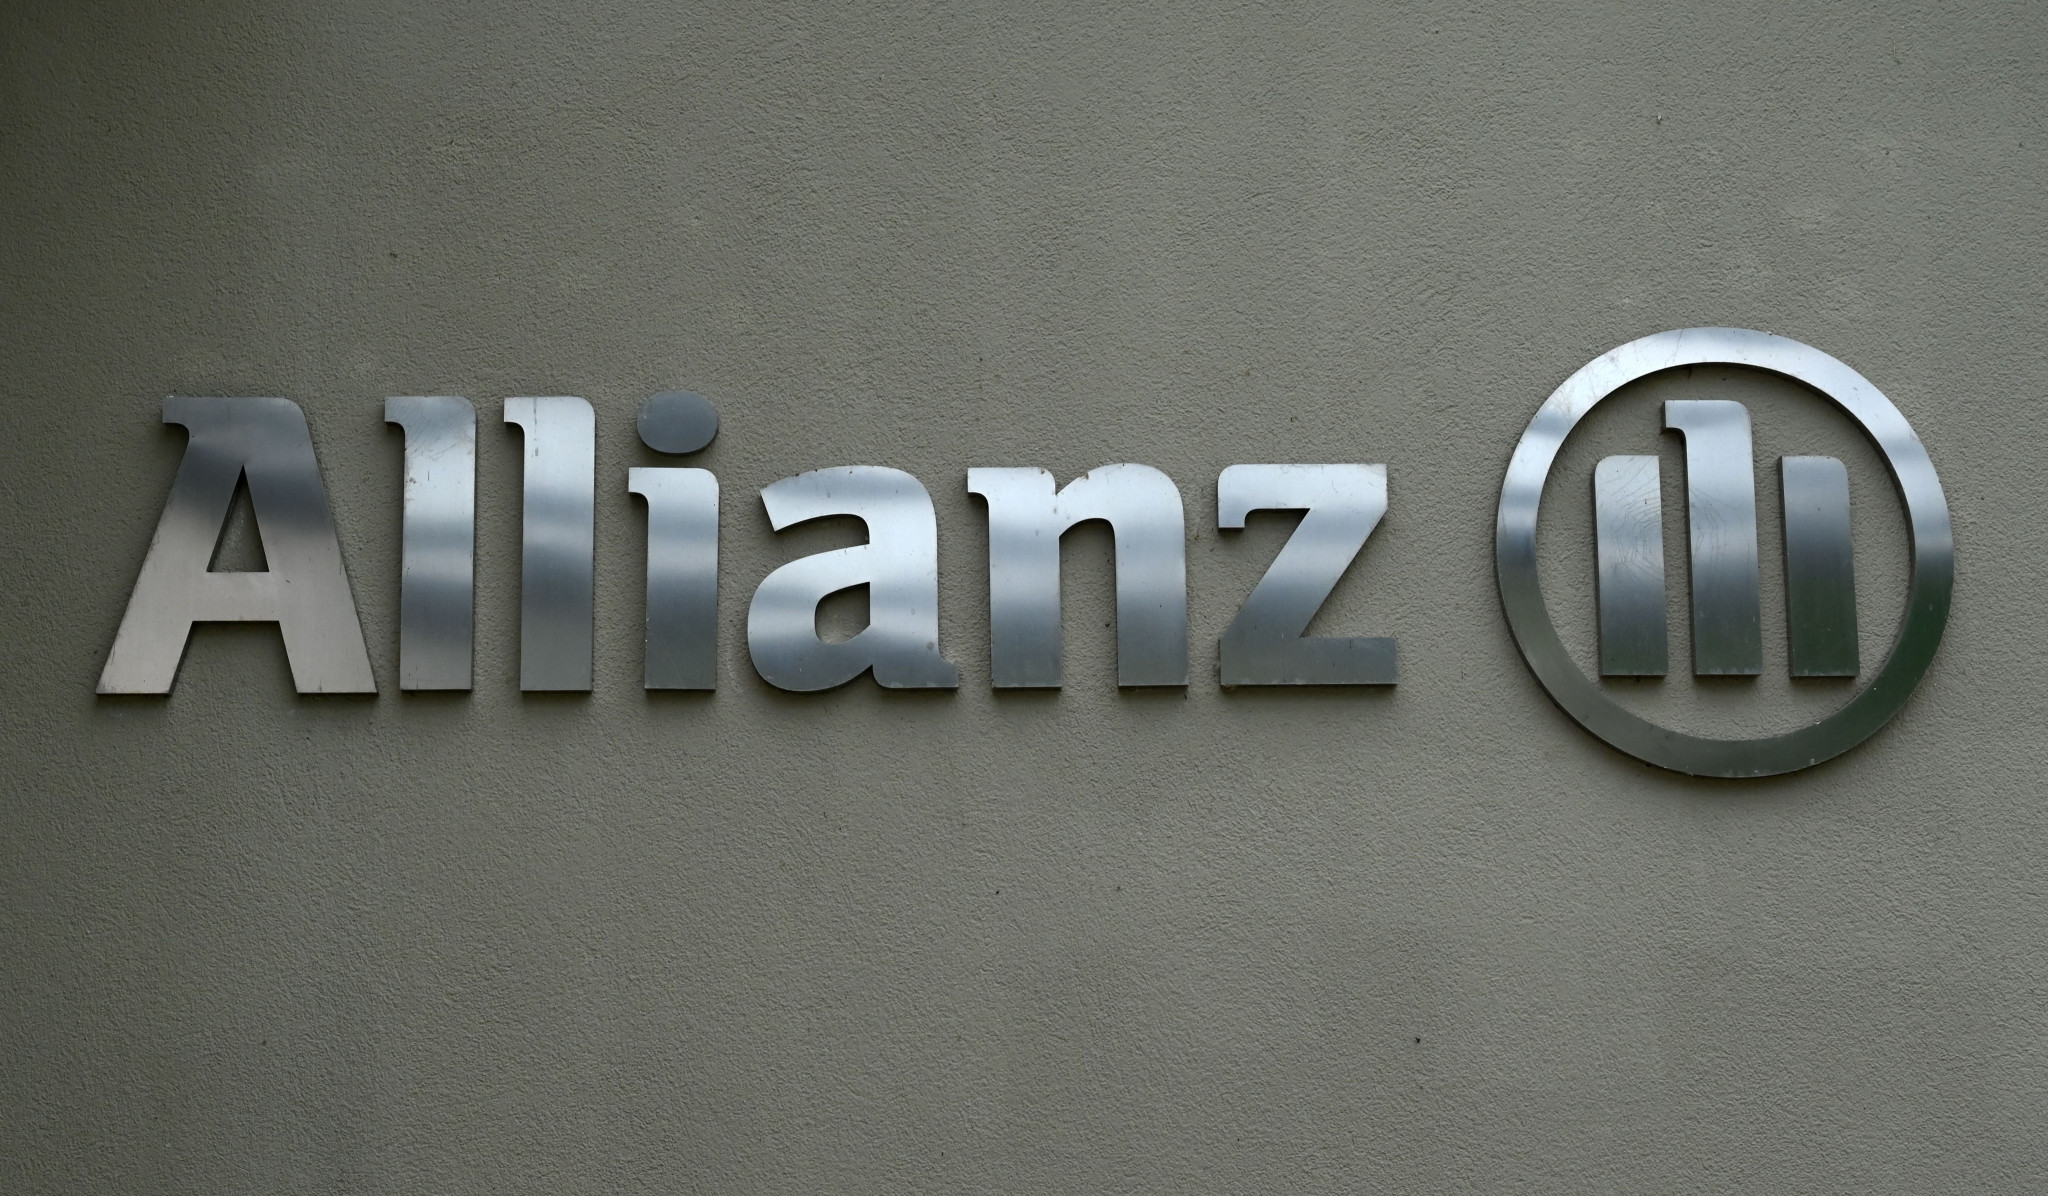 Olympic and Paralympic insurance partner Allianz has held engagement activities and events with athletes in the run-up to Paris 2024 ©Getty Images